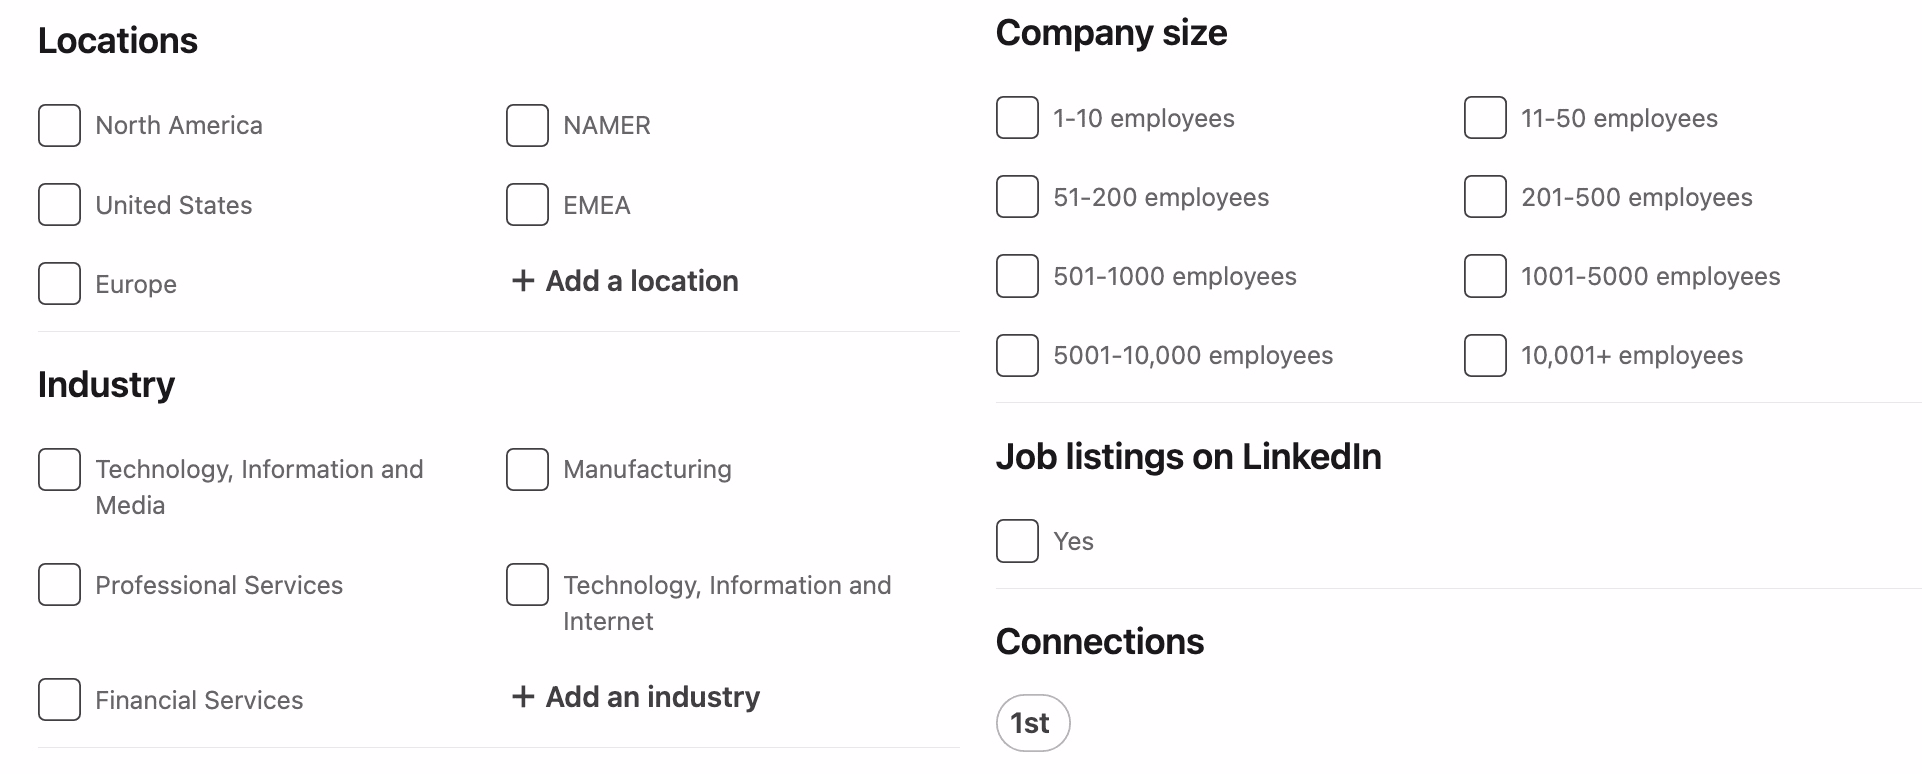 linkedin companies advanced search filters - image39.png